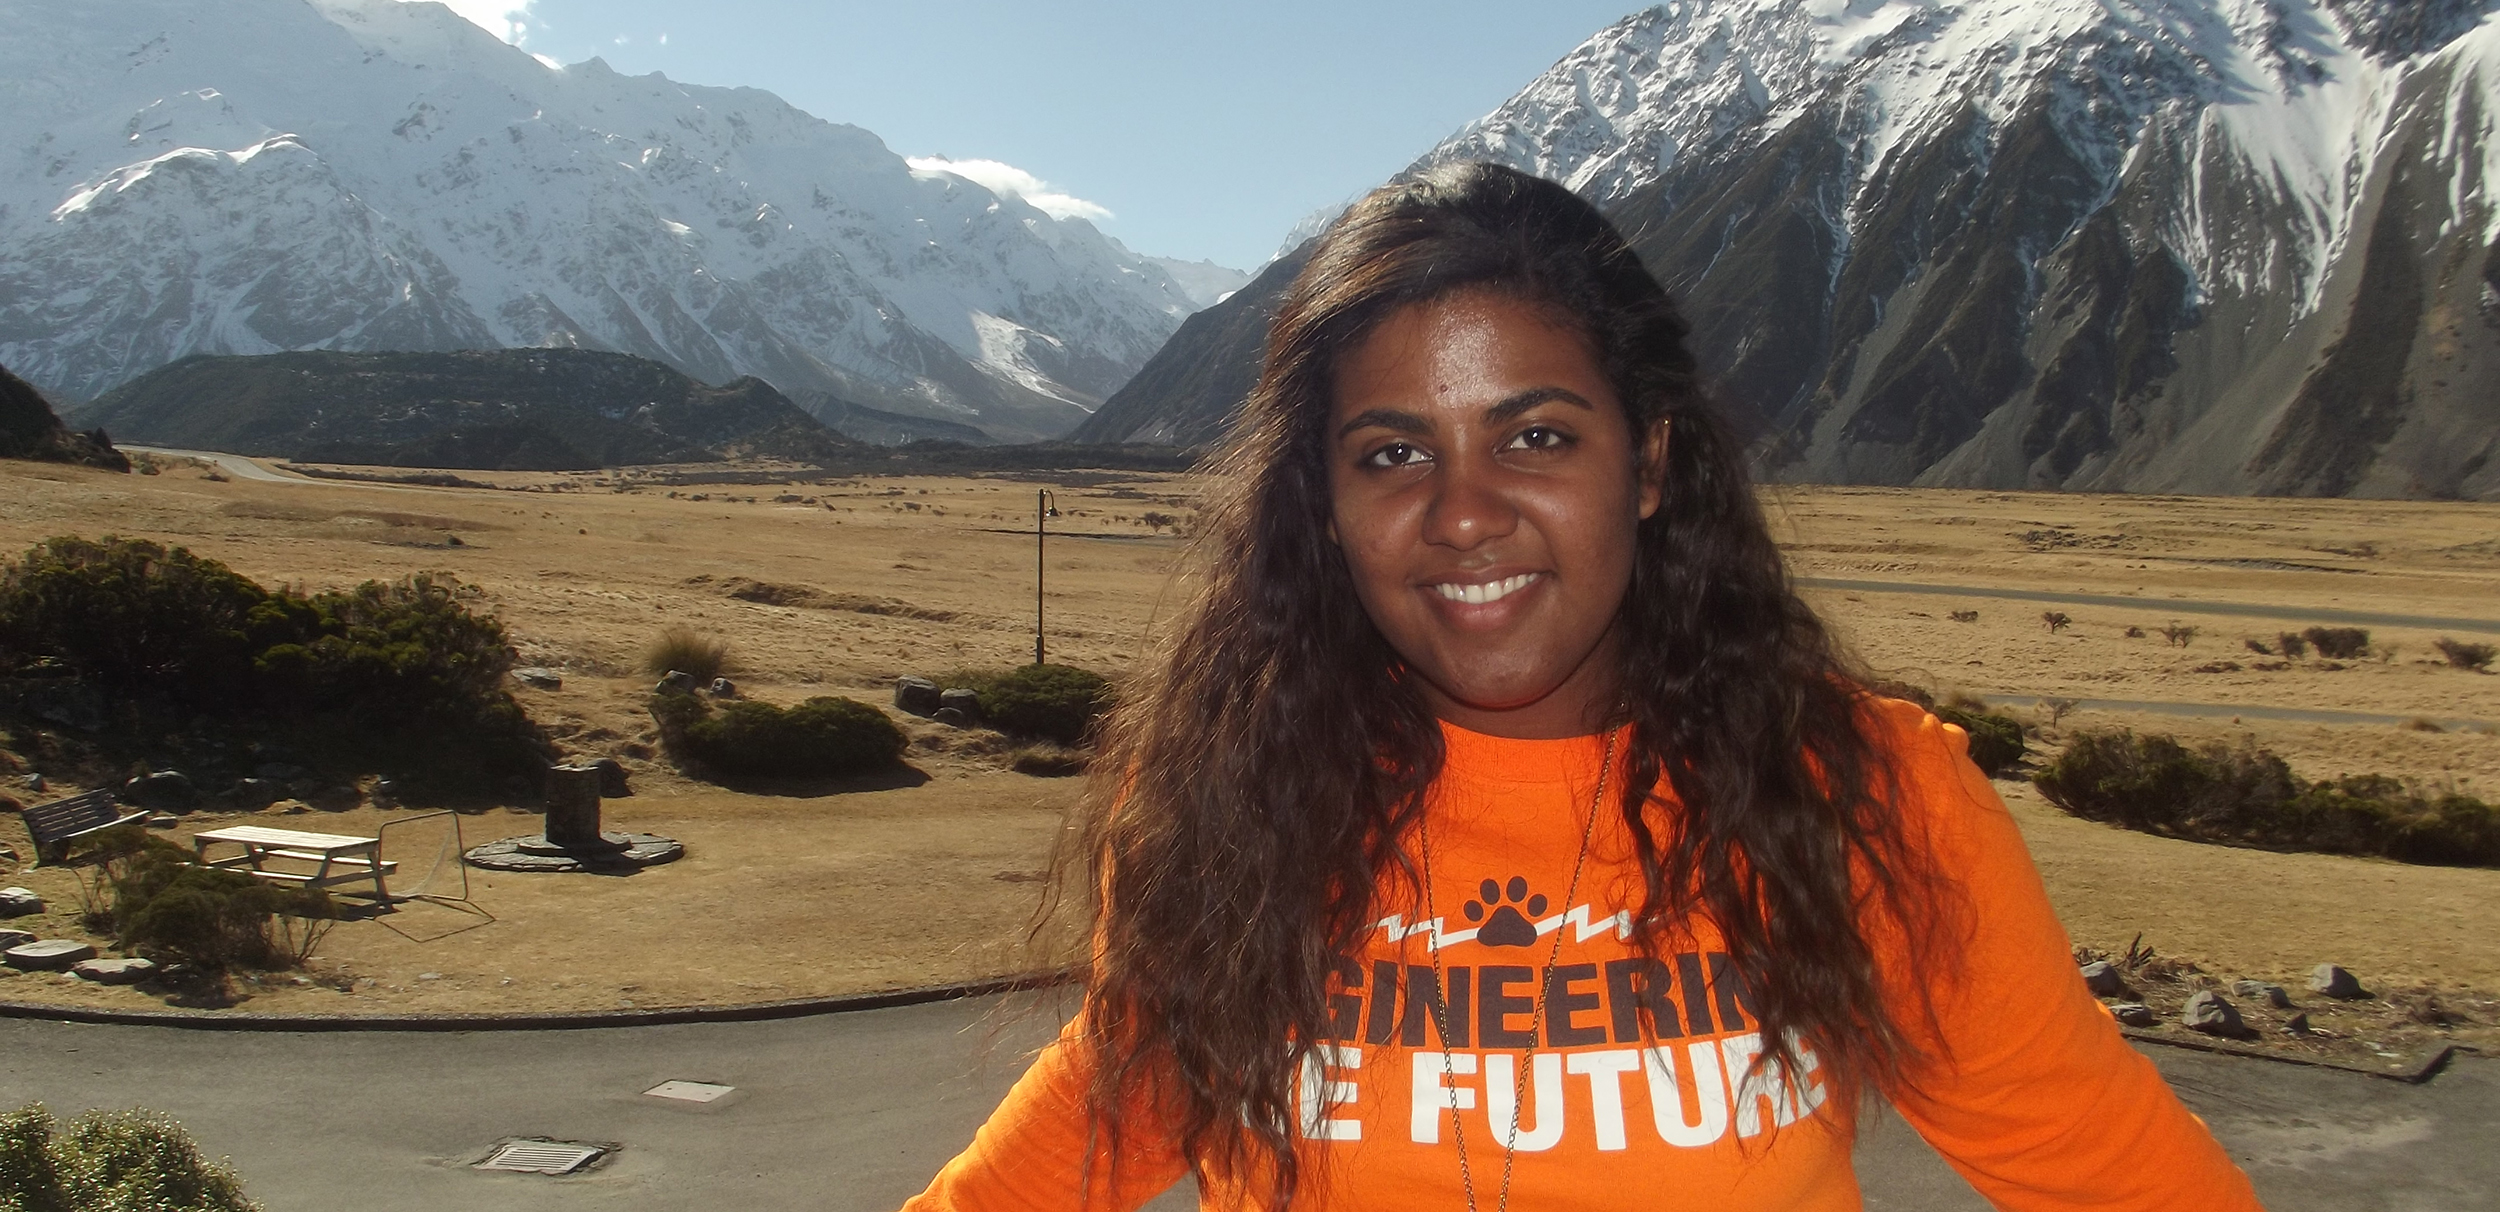 An engineering student poses for a photo in front of mountains while studying abroad.